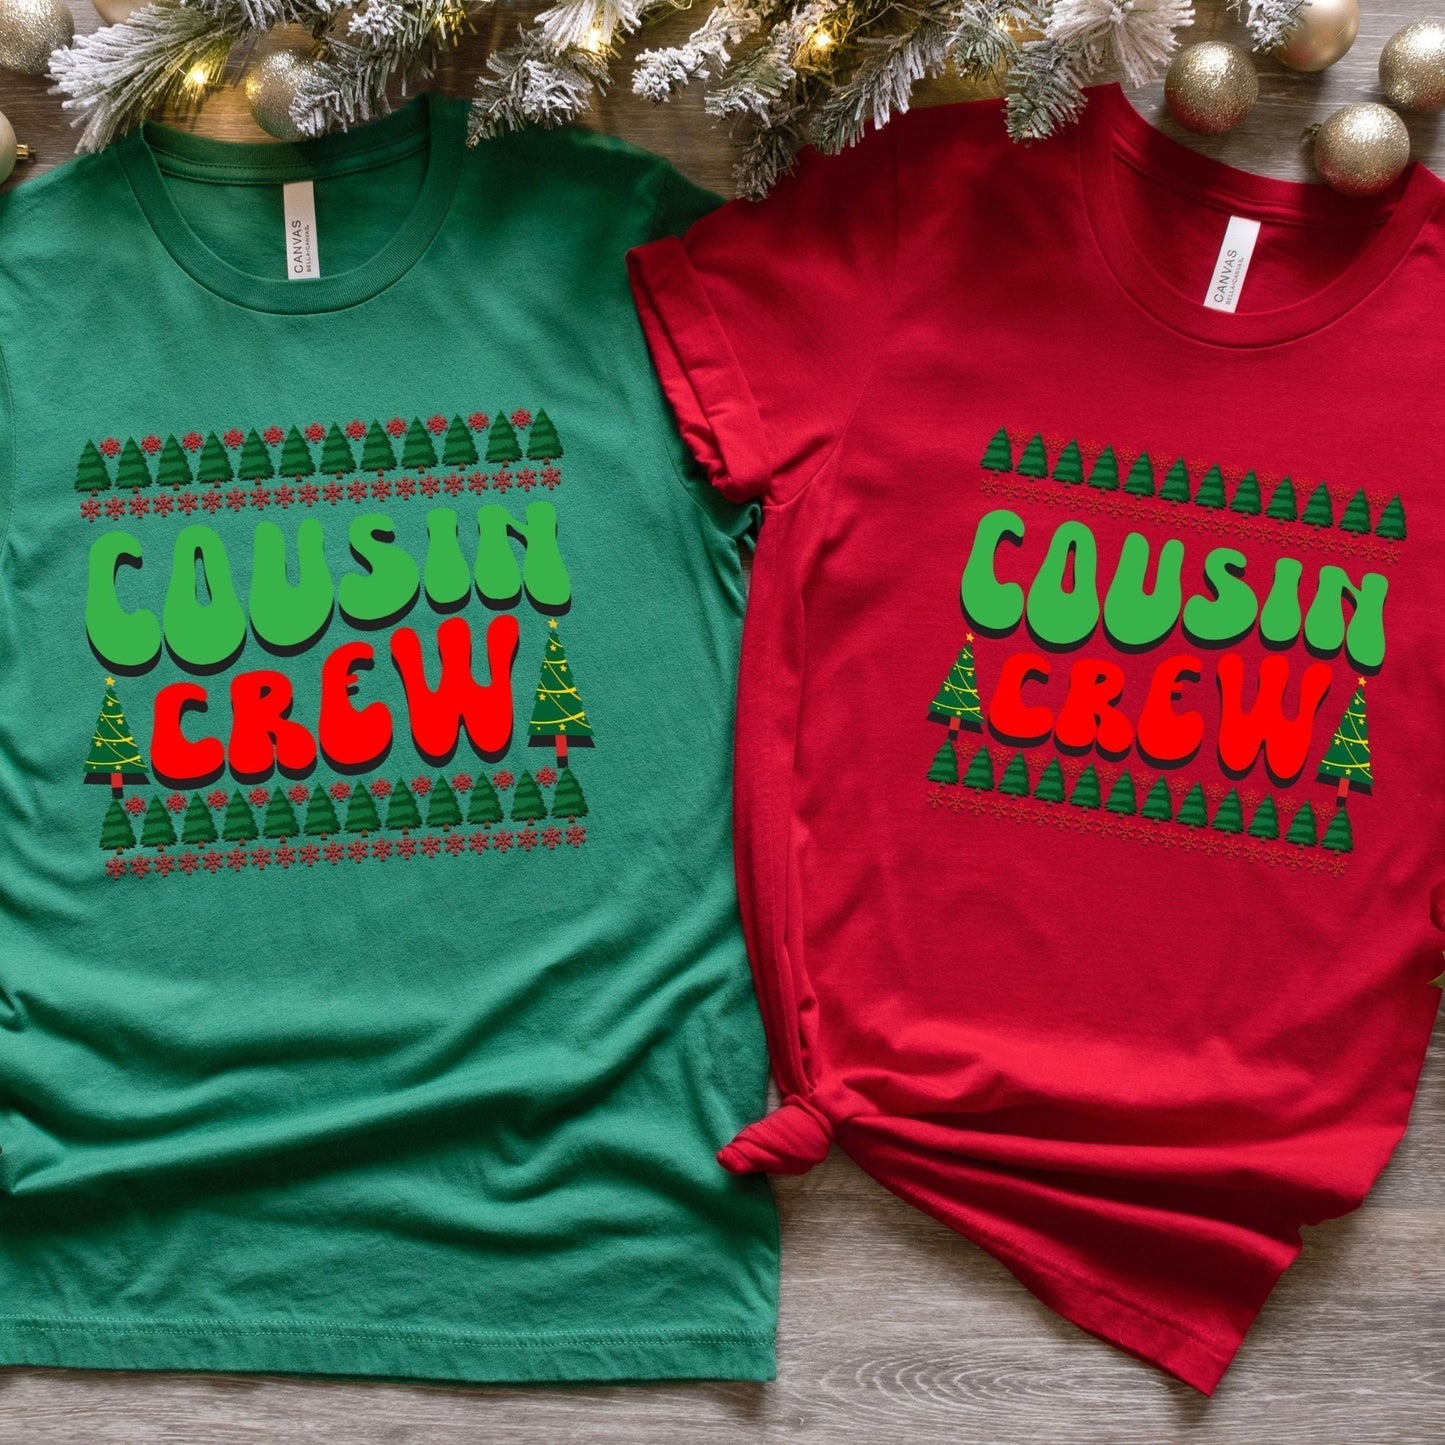 Cousin Crew Christmas Family Shirts, Retro Matching Group T-shirts, Cousin Squad Xmas Sweaters, Matching Family Holiday Photos, Cousin Gifts HMDesignStudioUS